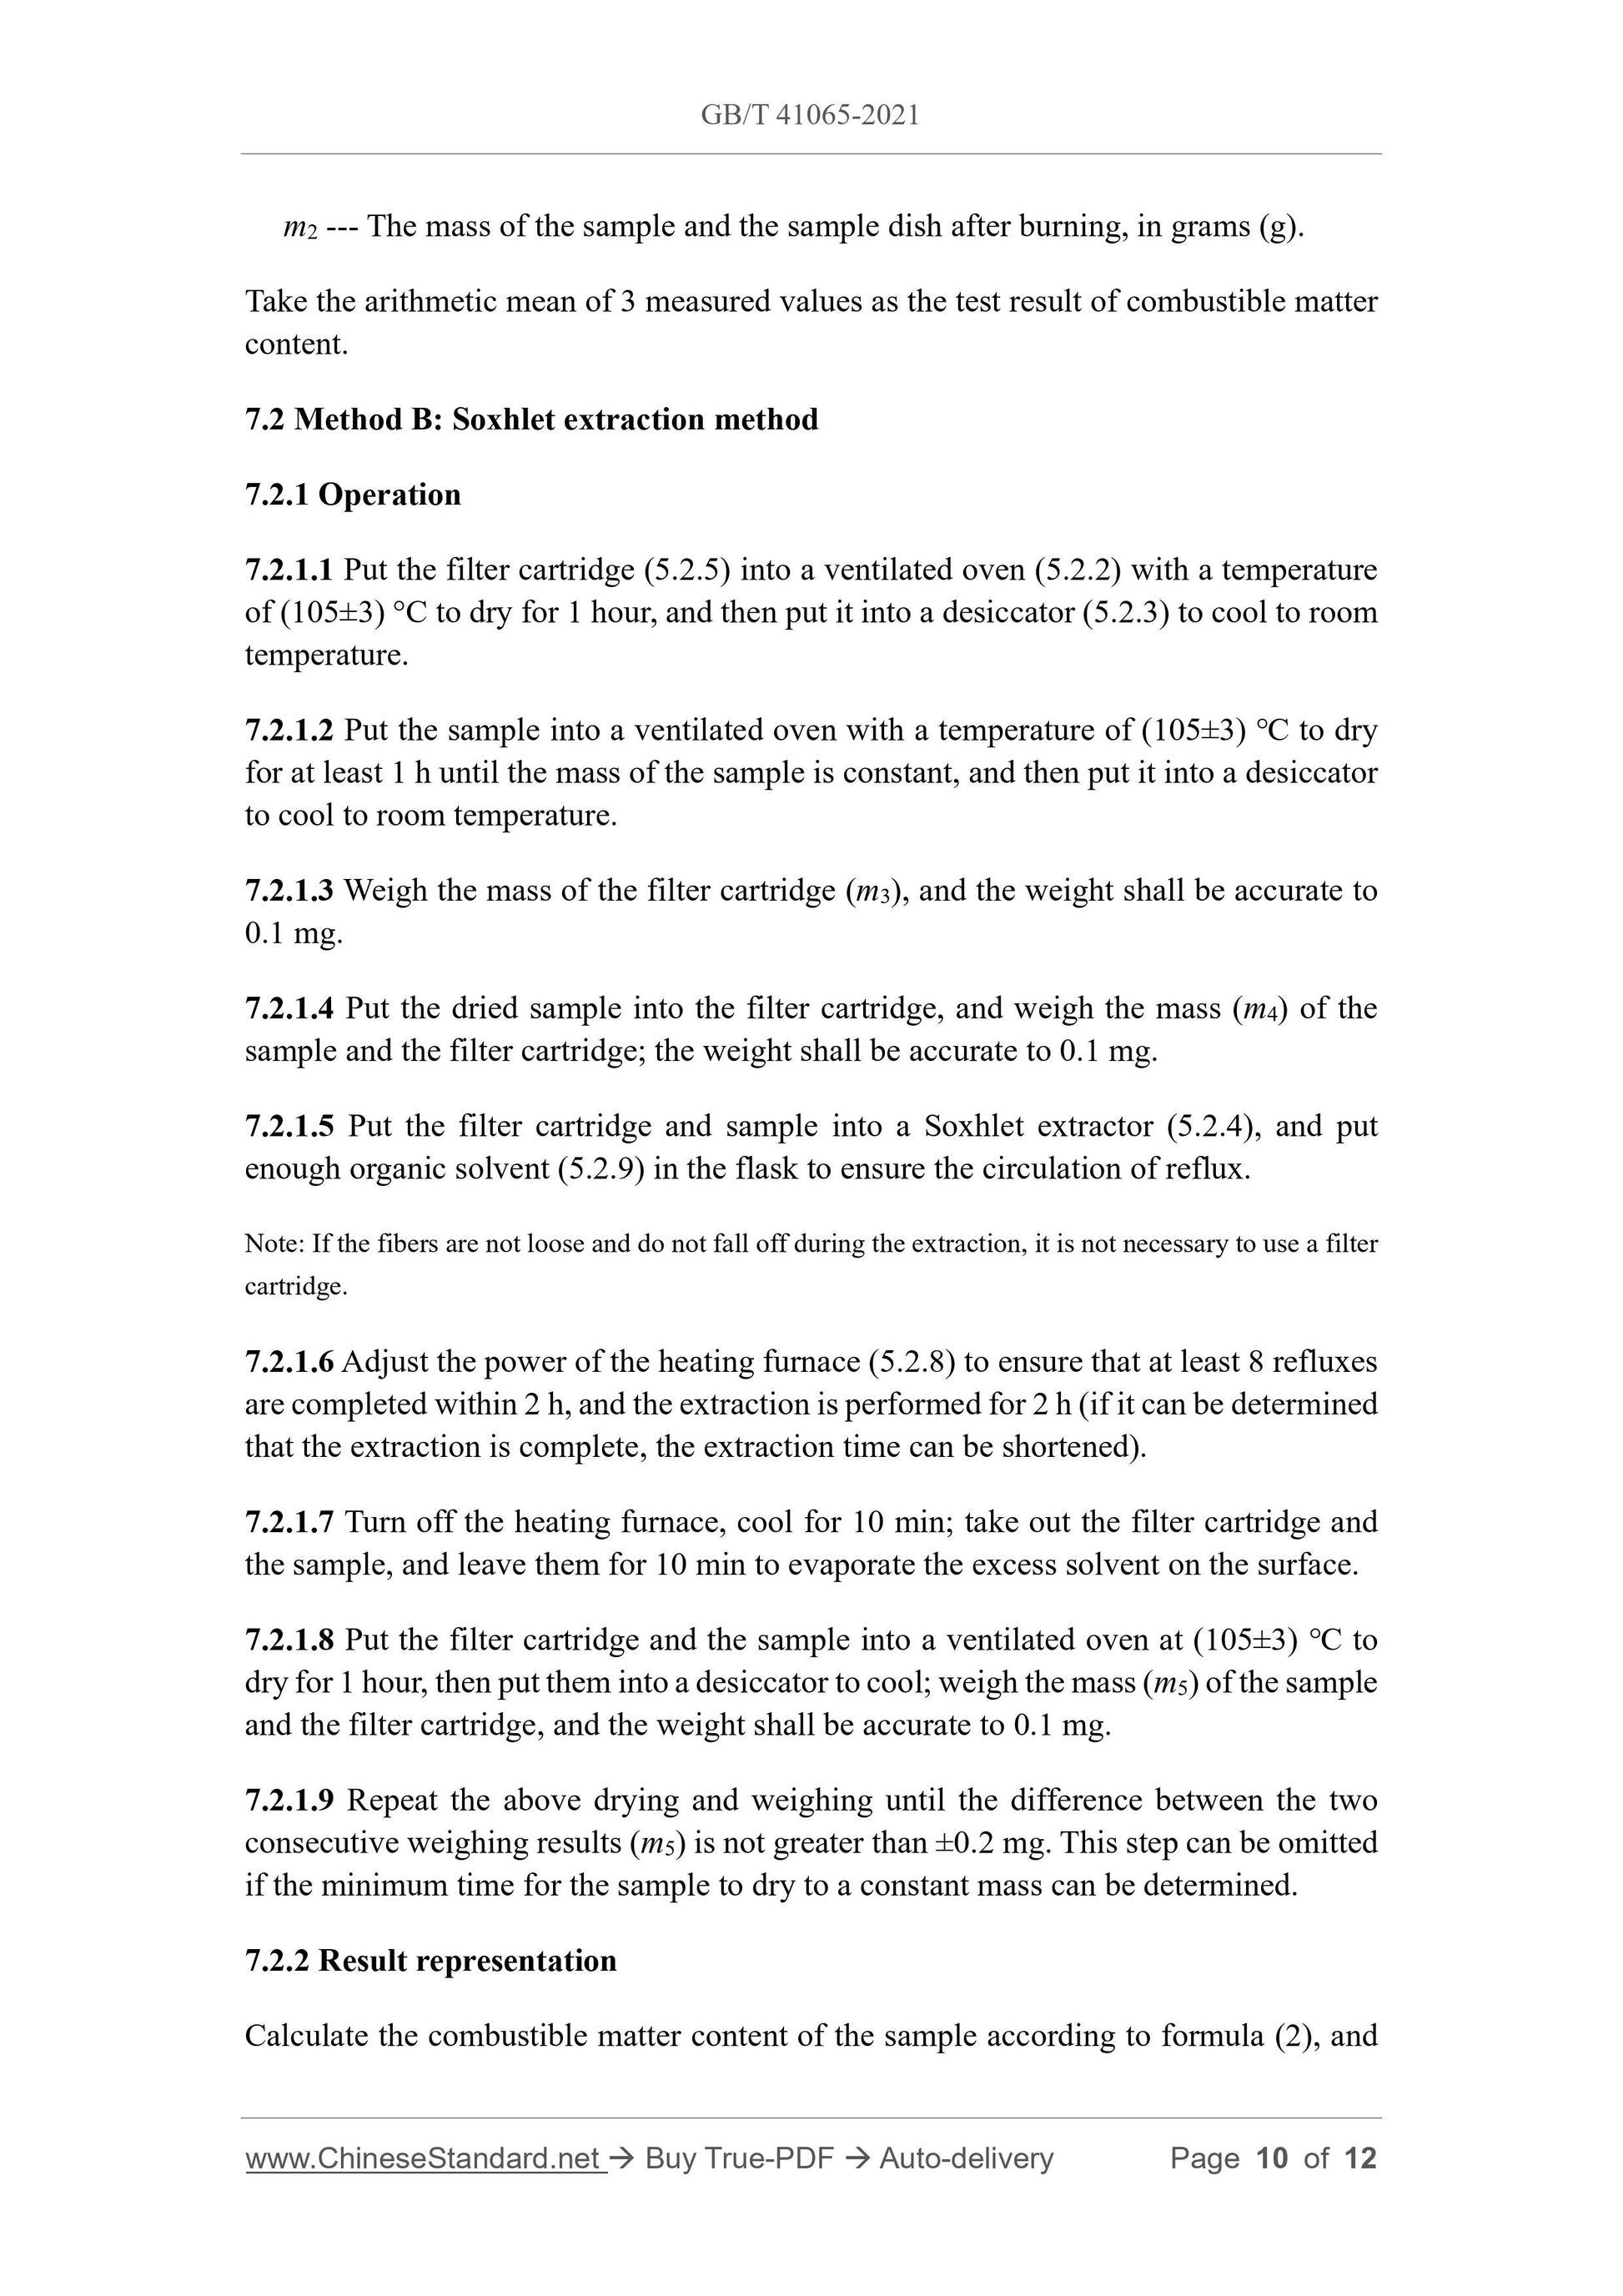 GB/T 41065-2021 Page 7